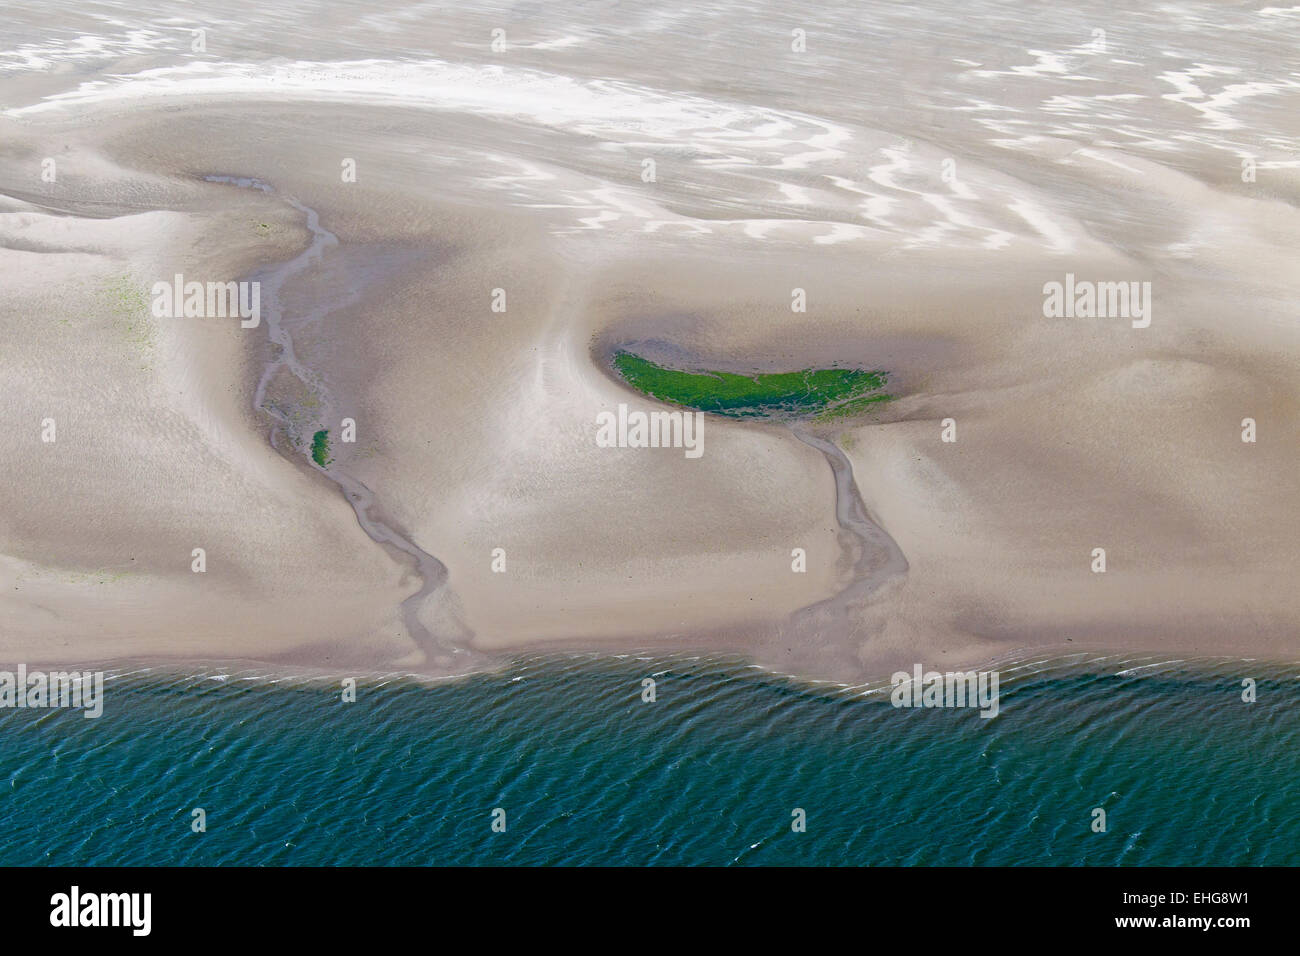 Aerial view of tidal mudflats and seagrass / eelgrass (Zostera marina), Schleswig-Holstein Wadden Sea National Park, Germany Stock Photo